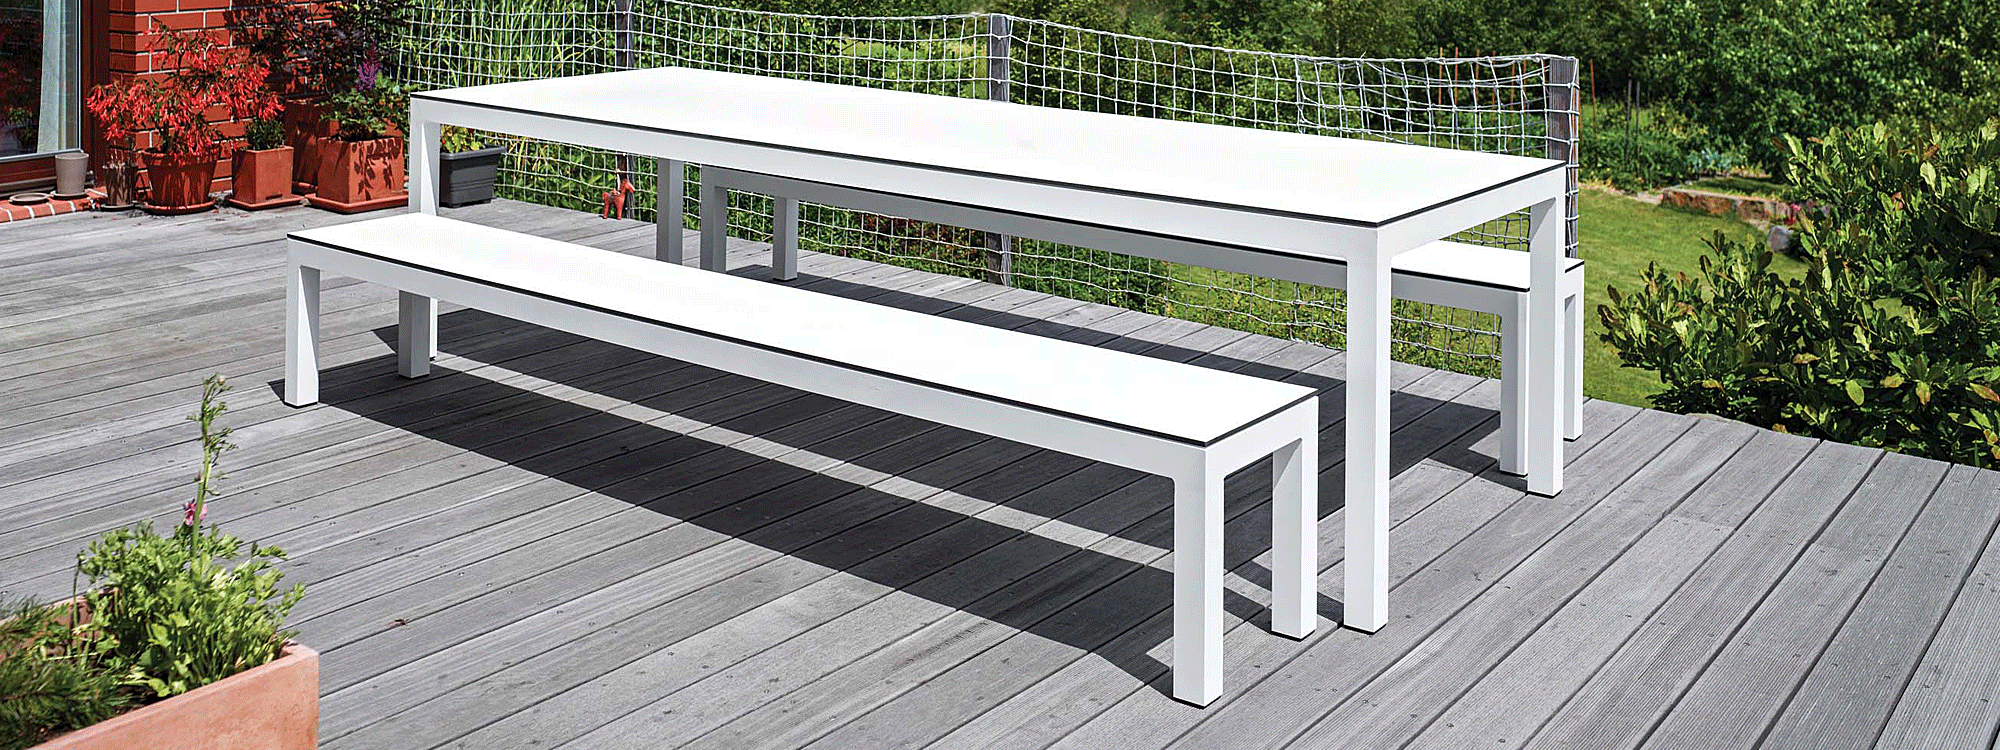 Leuven garden table bench set is a range of contemporary outdoor dining furniture by Todus stainless steel garden furniture company